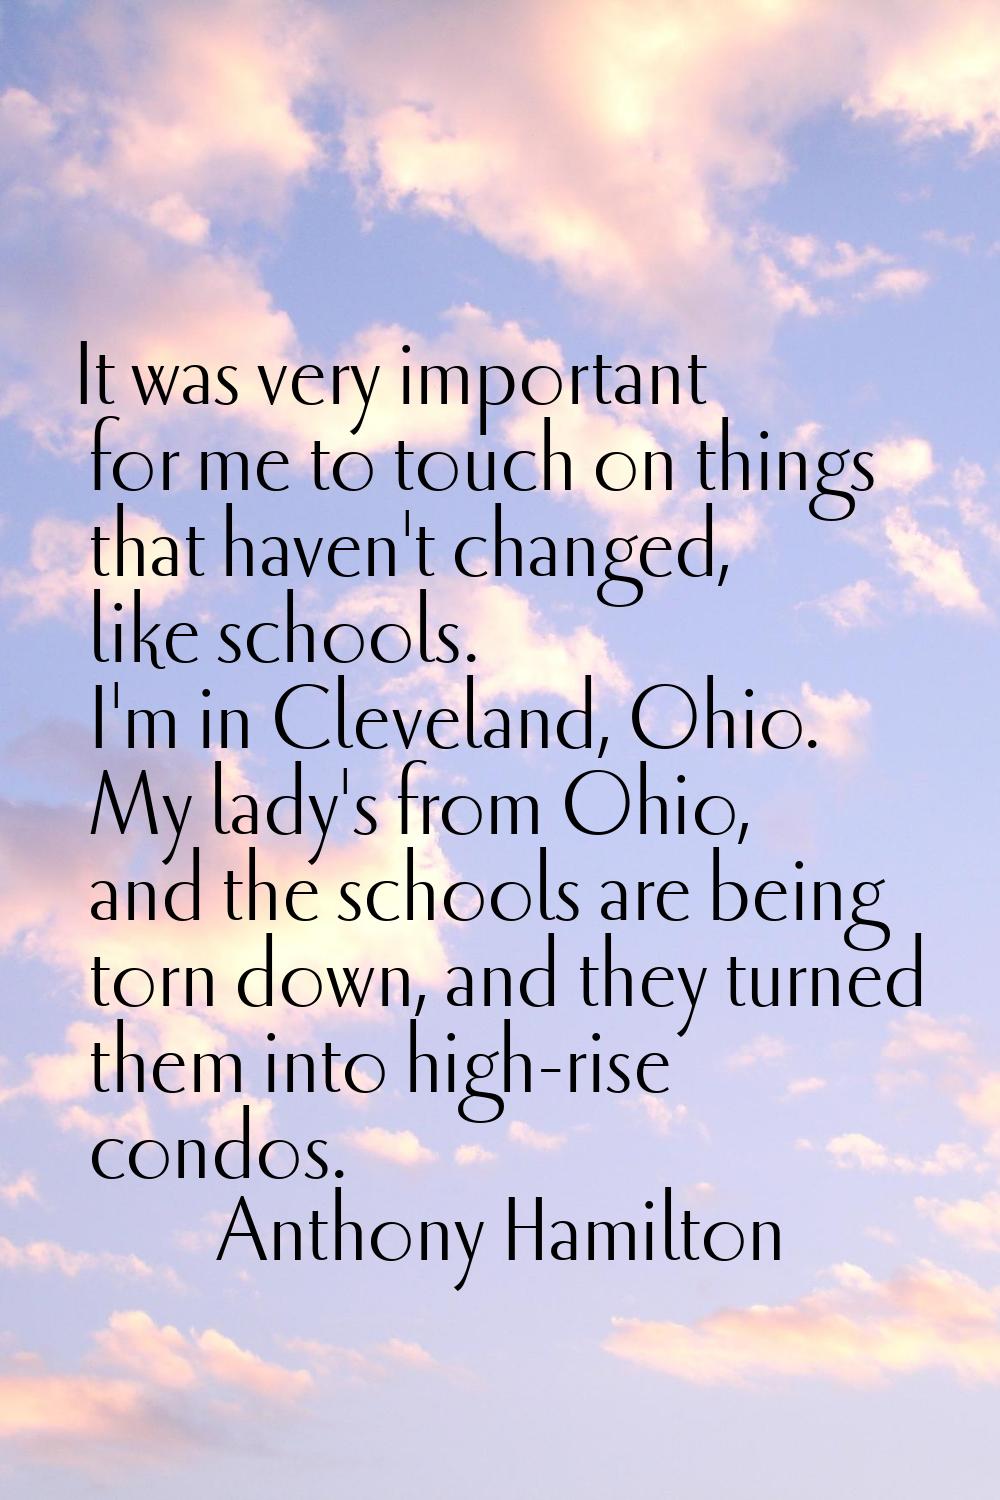 It was very important for me to touch on things that haven't changed, like schools. I'm in Clevelan